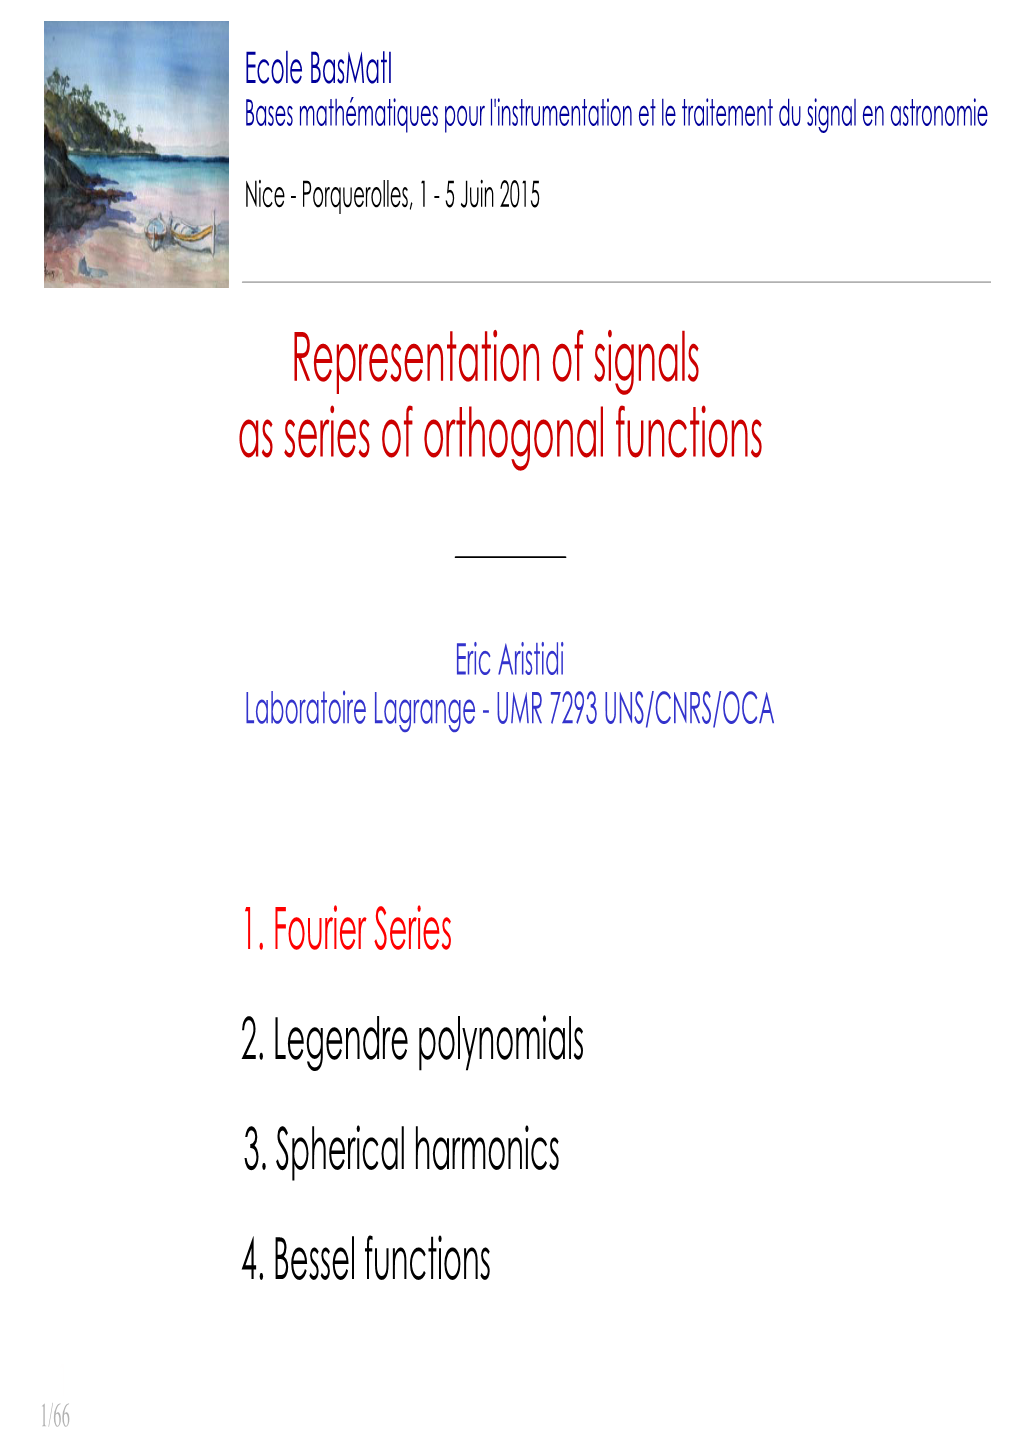 Representation of Signals As Series of Orthogonal Functions